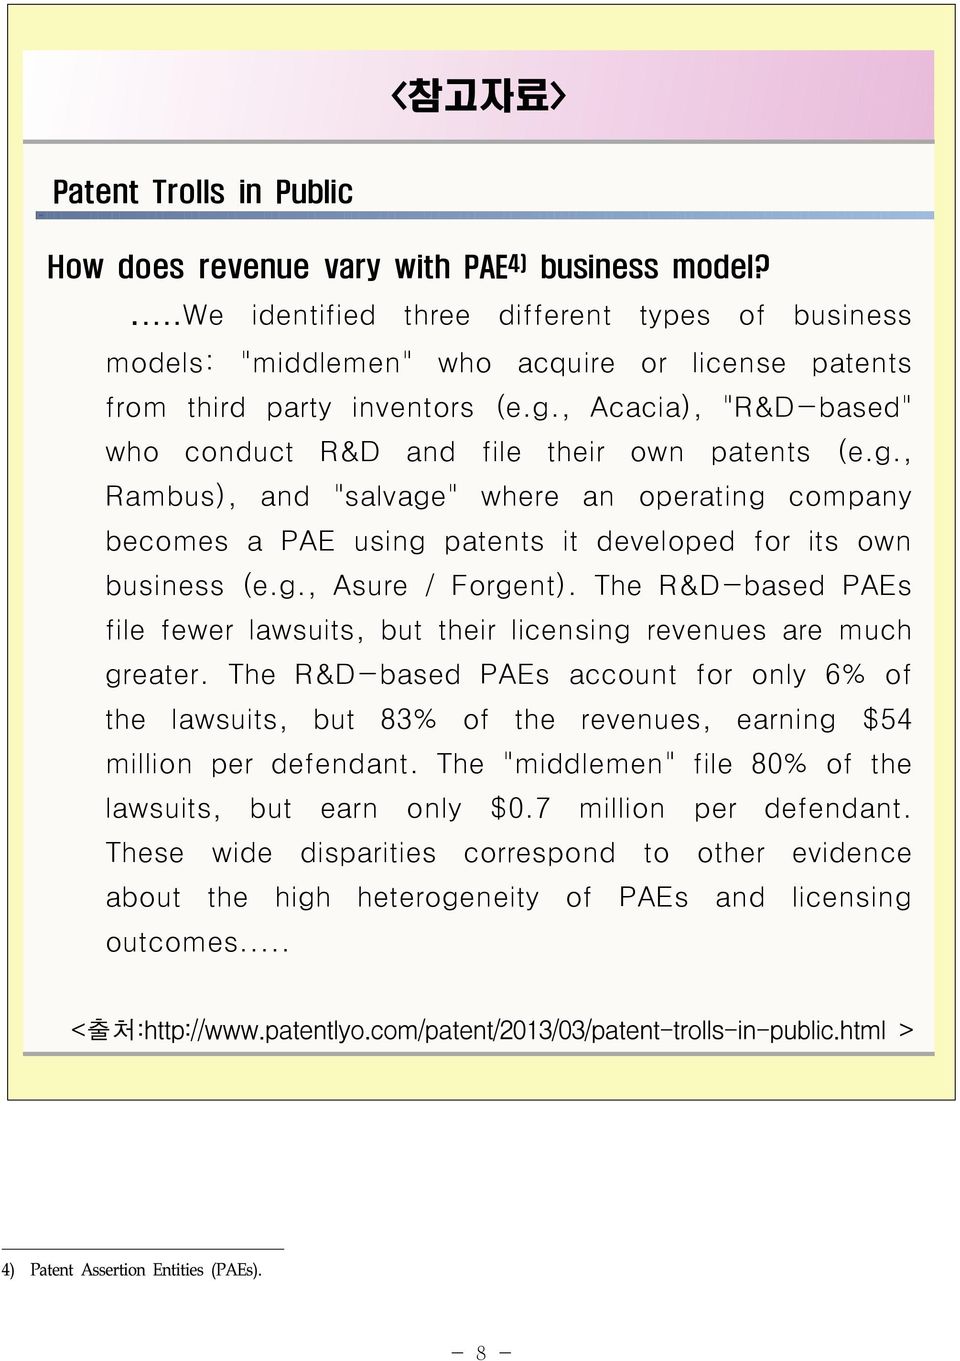 , Acacia), "R&D-based" who conduct R&D and file their own patents (e.g., Rambus), and "salvage" where an operating company becomes a PAE using patents it developed for its own business (e.g., Asure / Forgent).